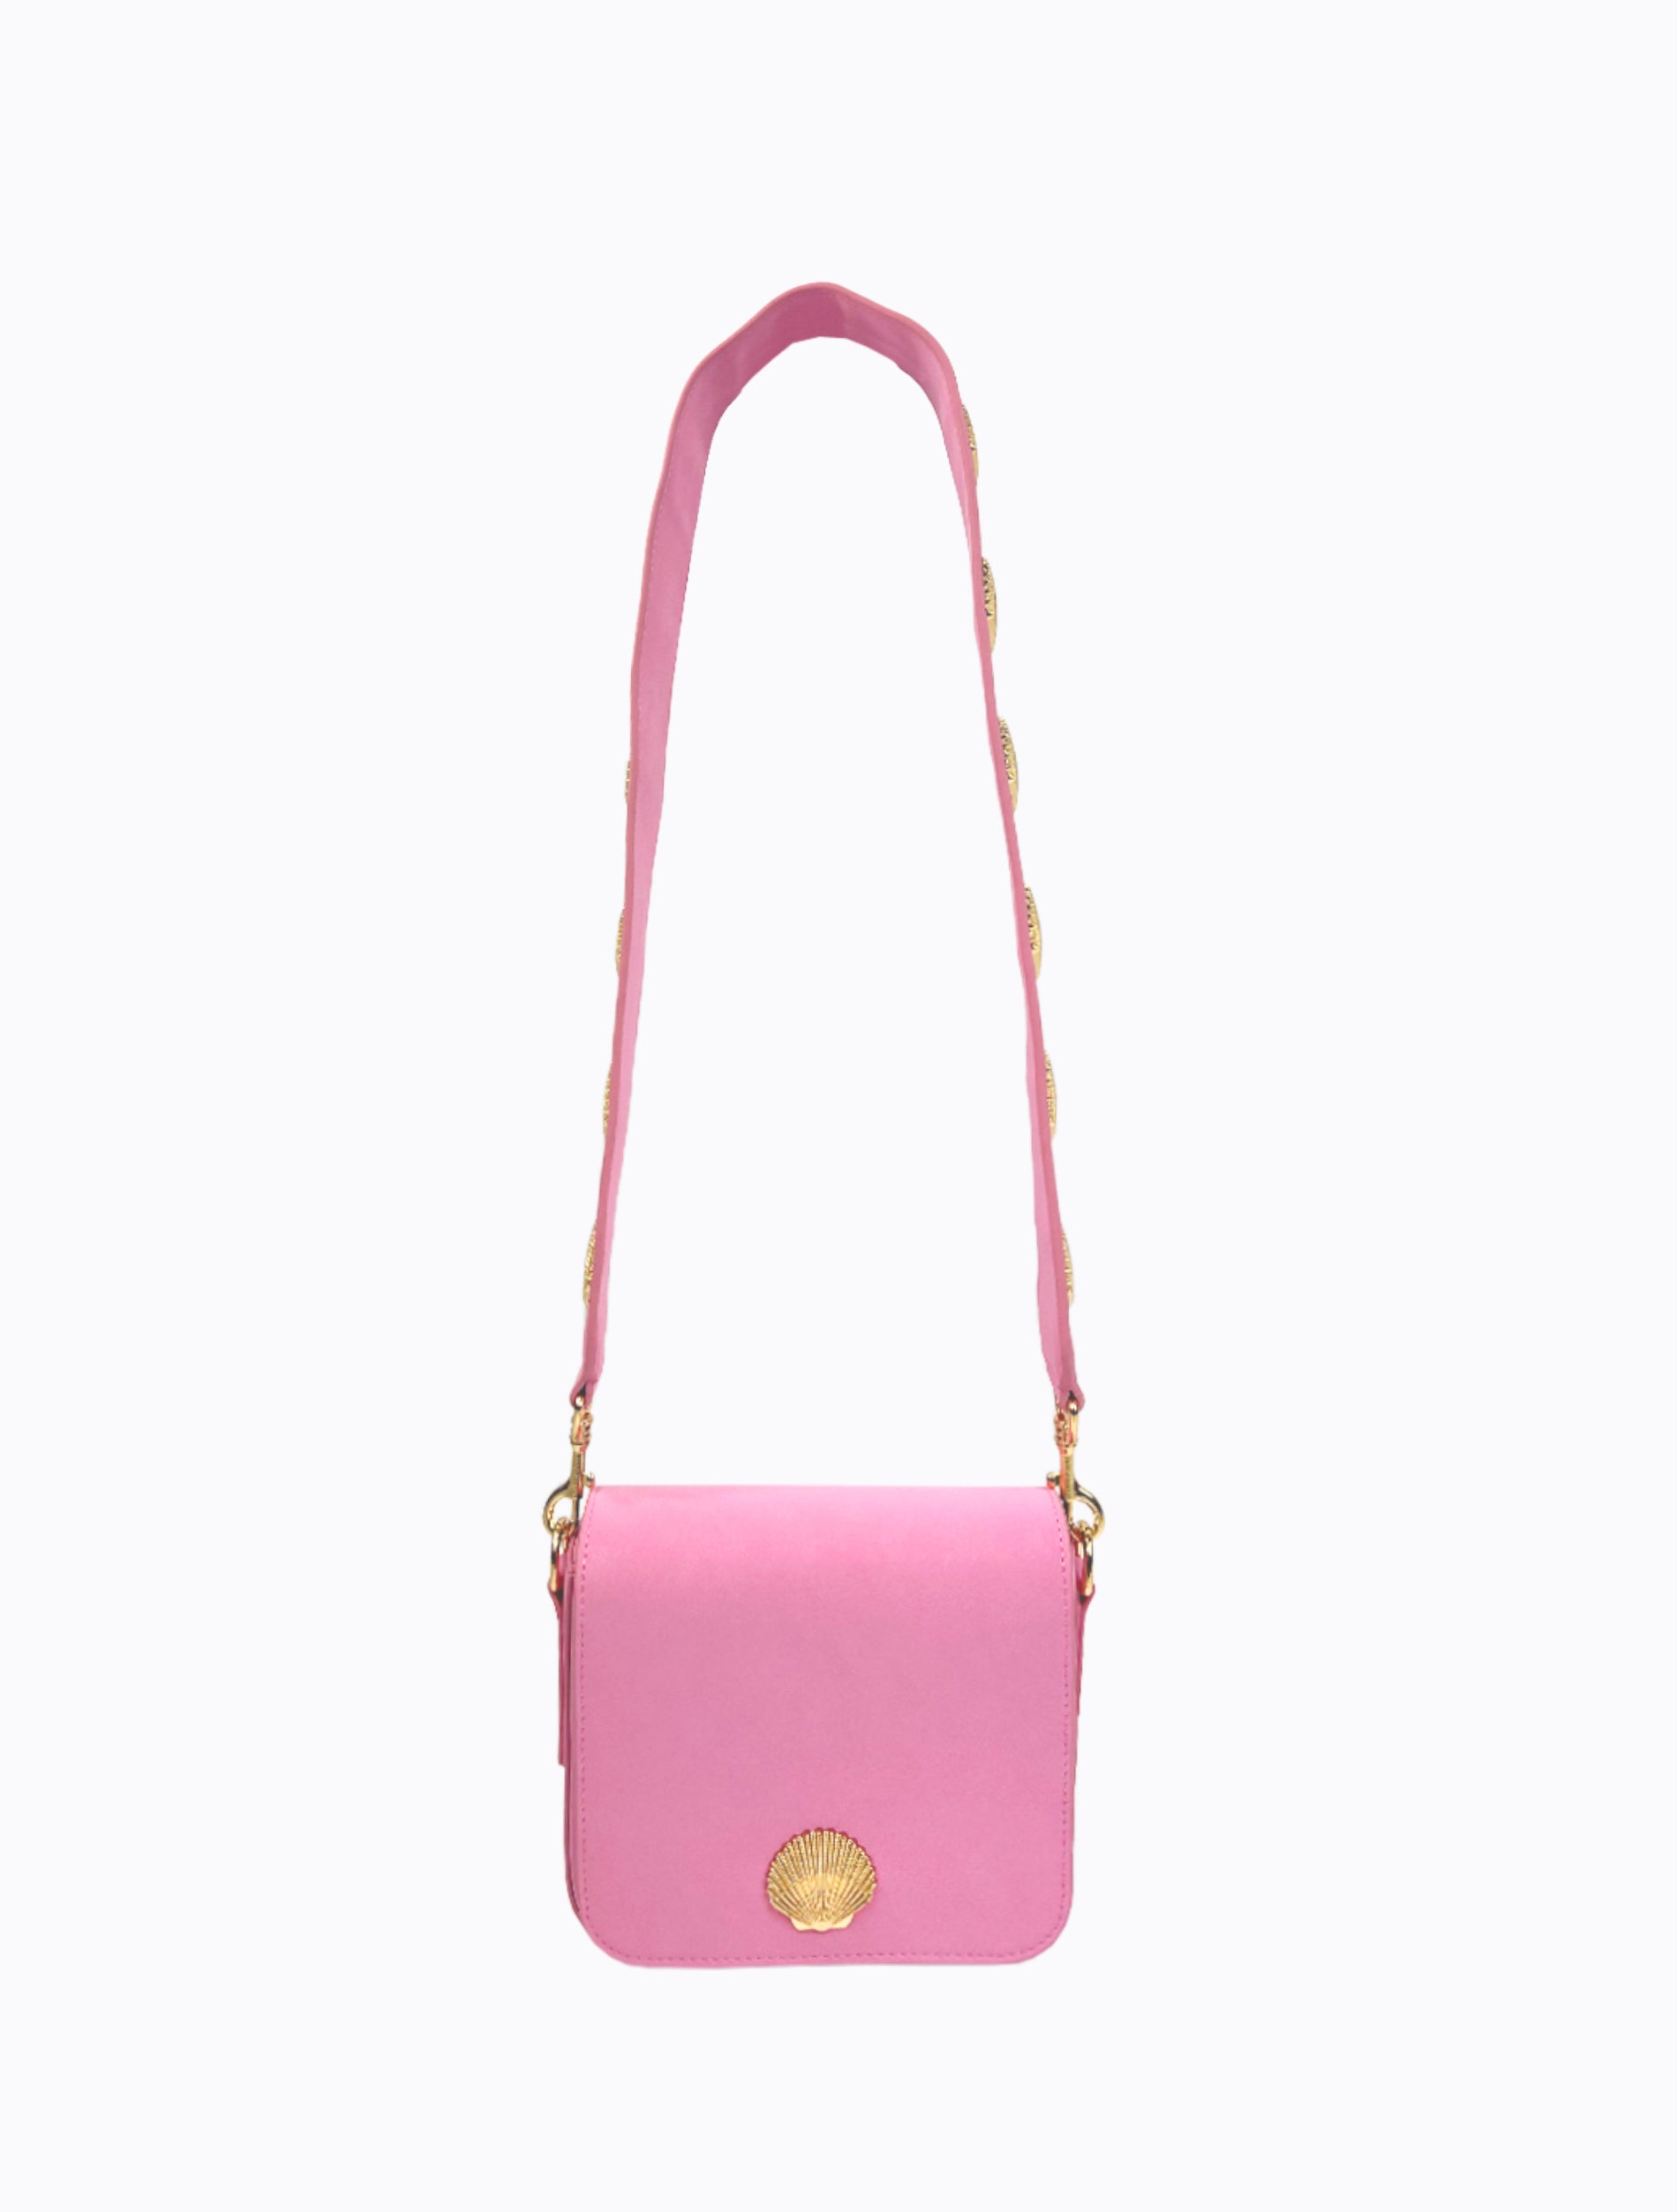 South Beach Shell Shoulder Bag - Pink – Poppy Lissiman US